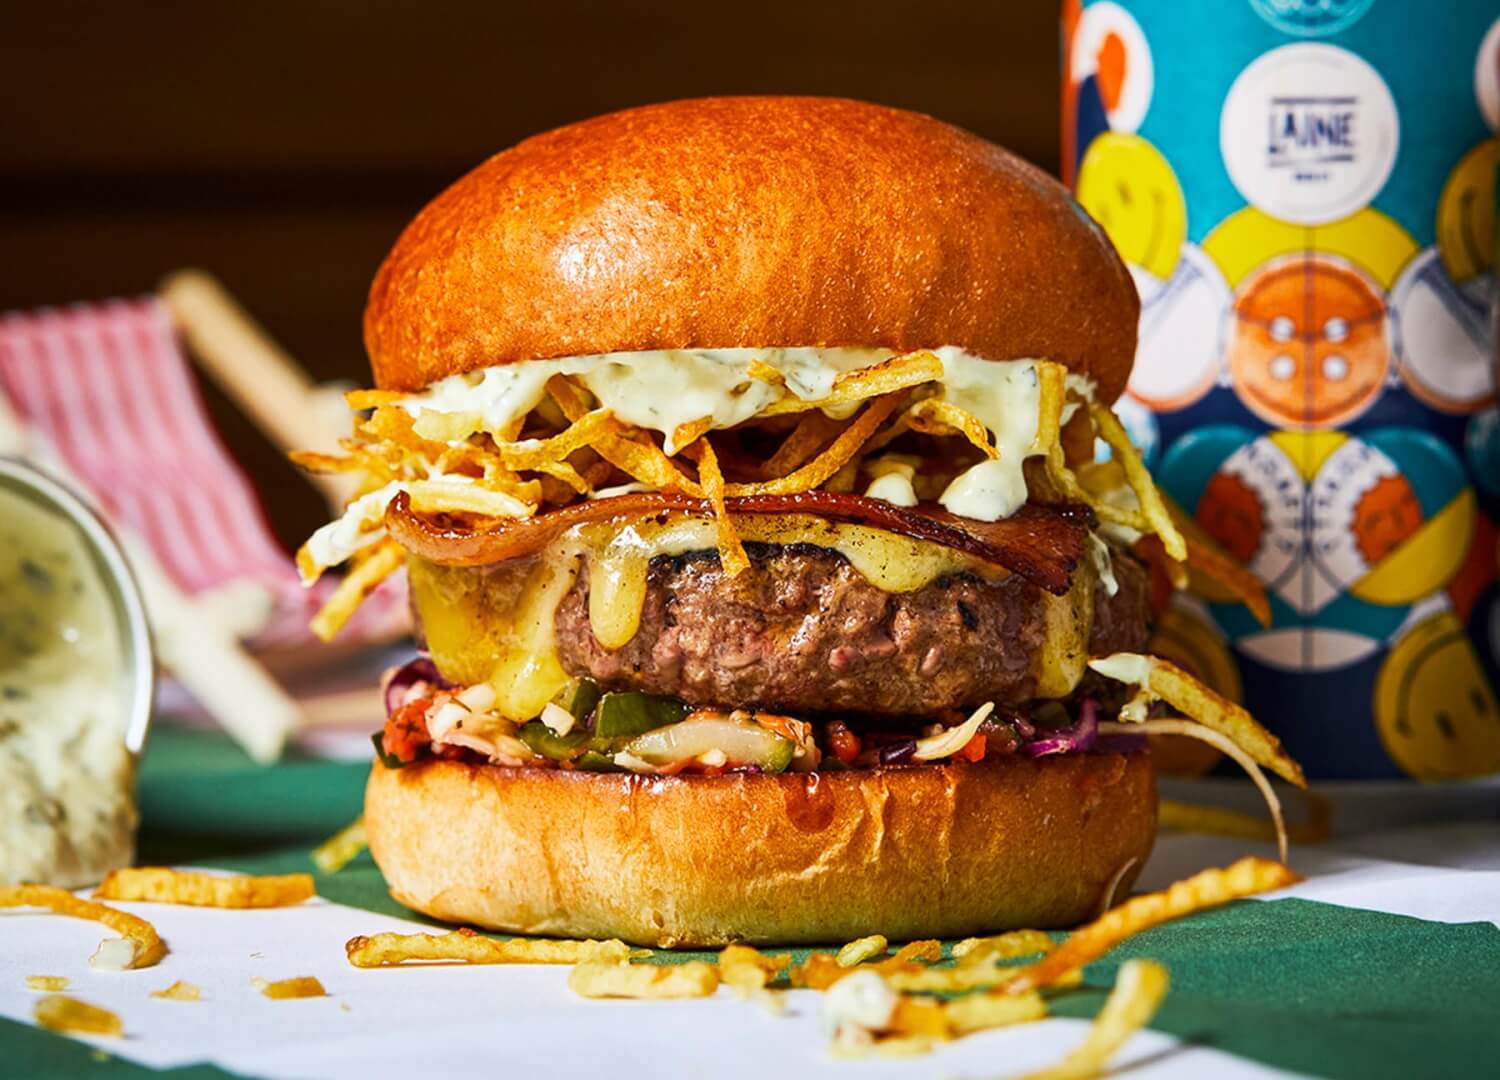 A new burger just for The Fortune of War on Brighton beach - beef, candied bacon, cheese, shoestring fries, garlic mayo and slaw with chips